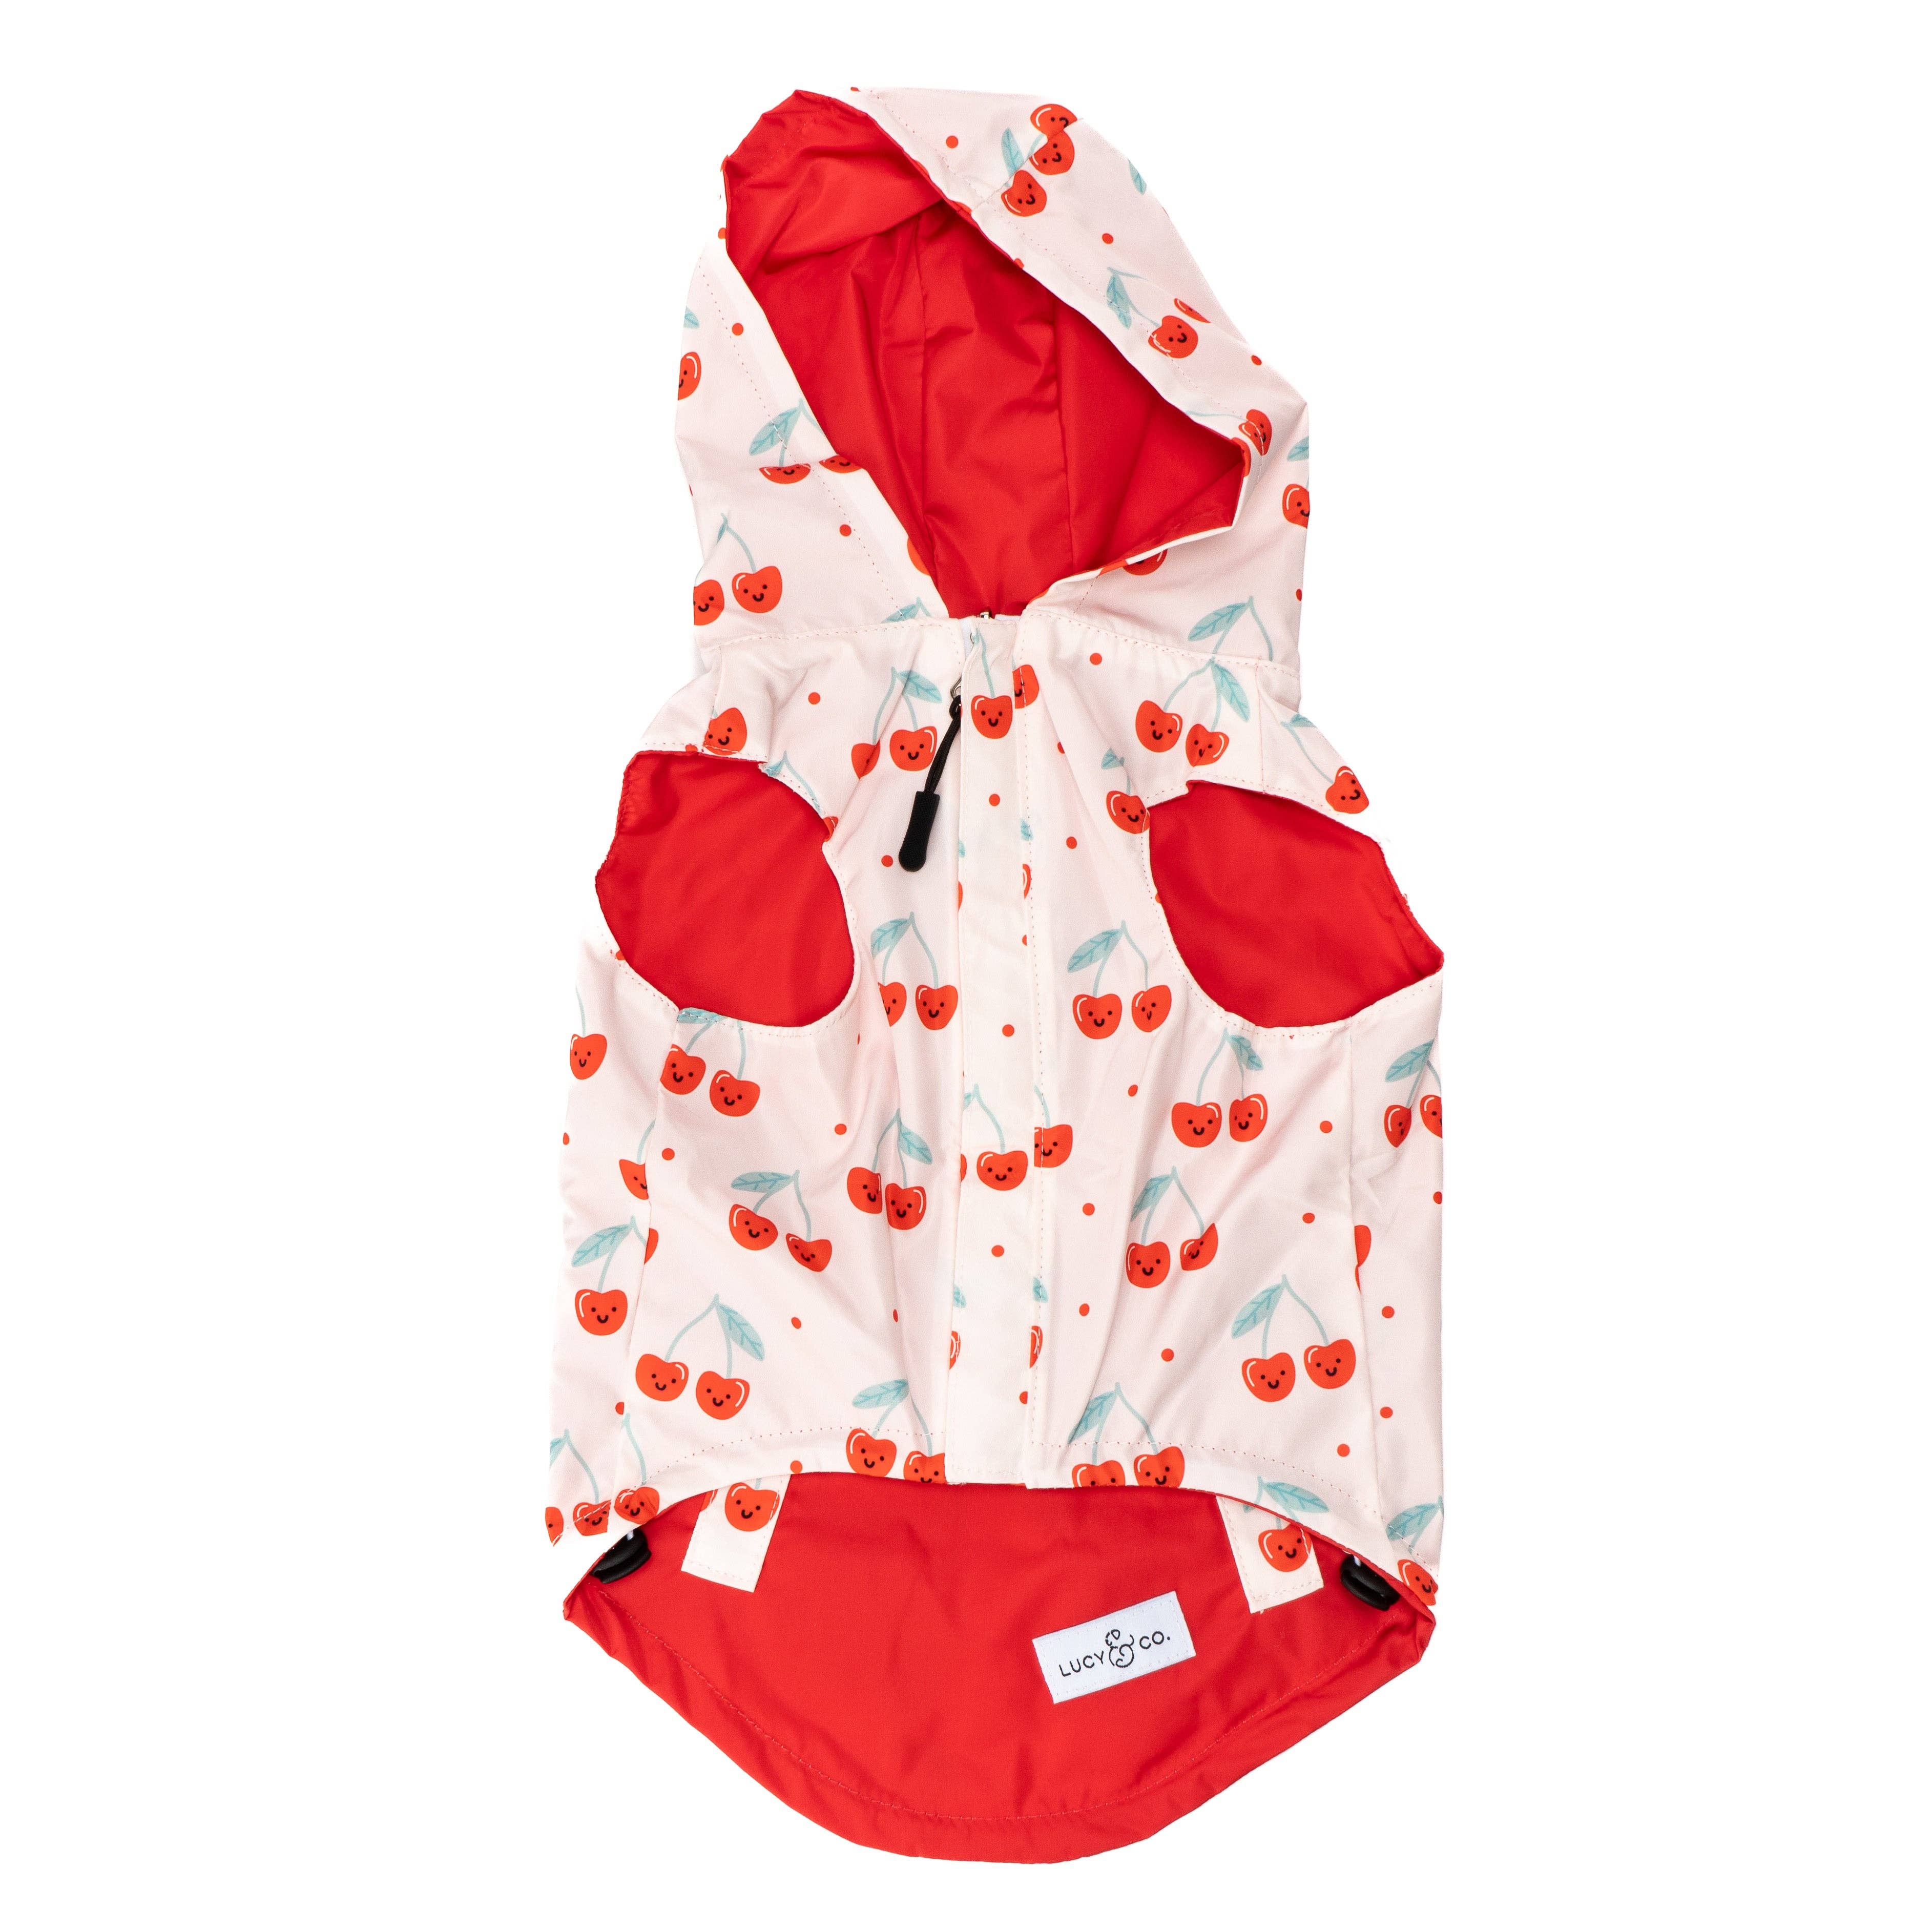 Lucy & Co. - The Cheery Cherries Reversible Raincoat: Large